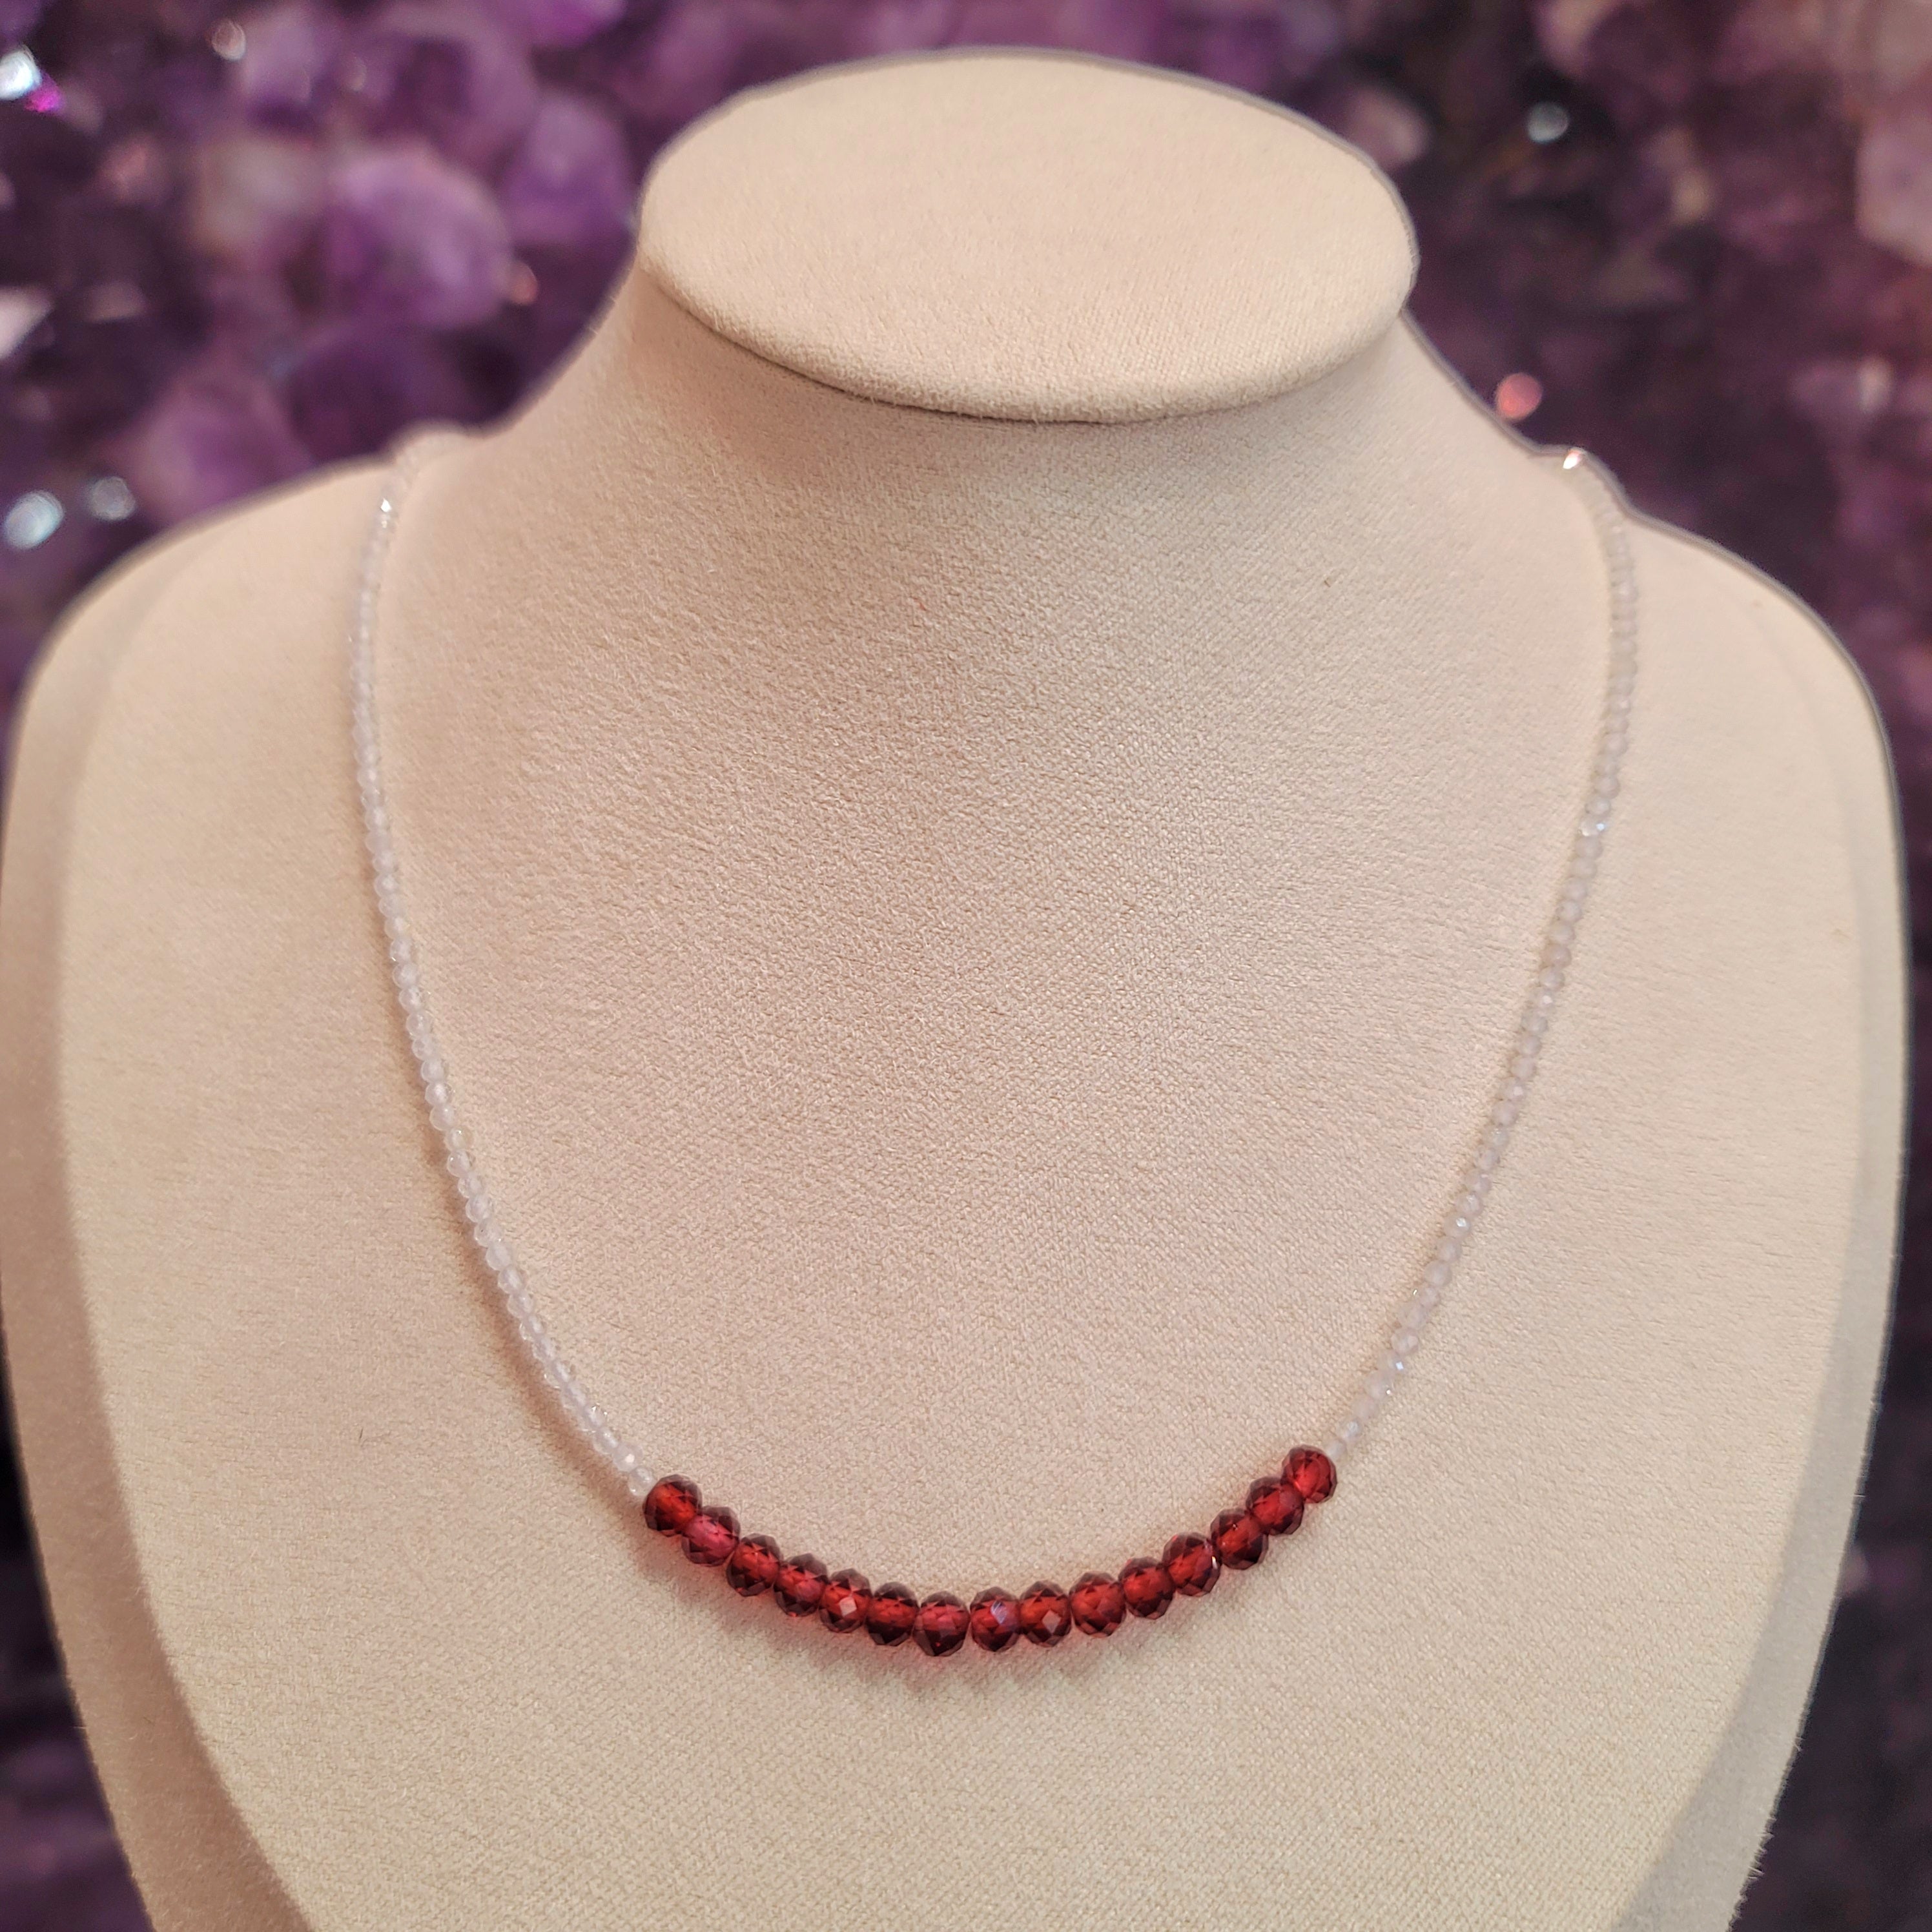 Red Garnet & White Topaz Micro Faceted Necklace for Health and Strength